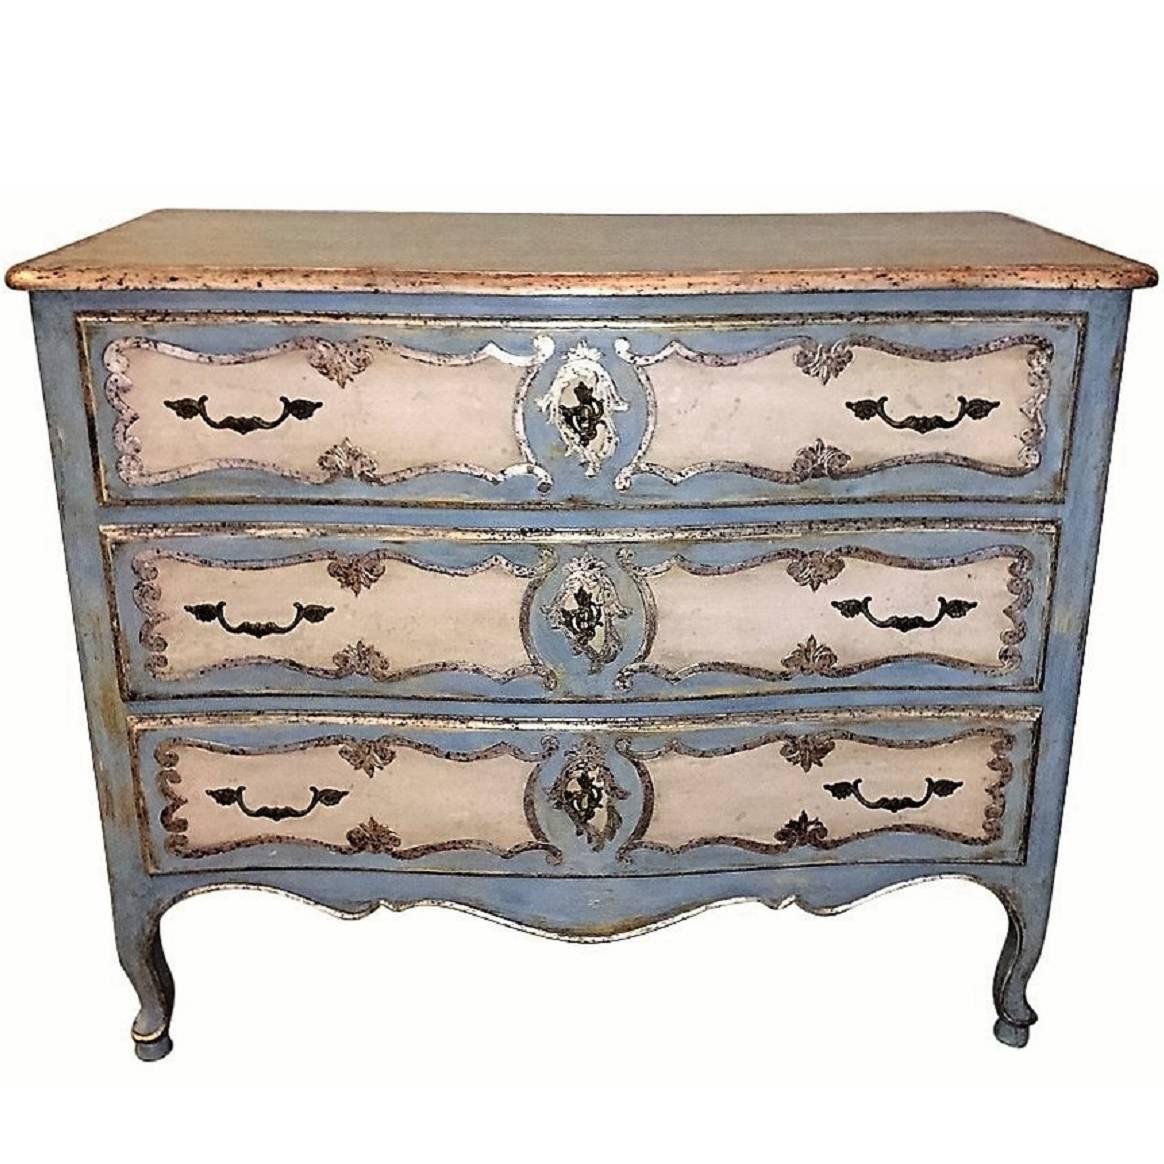 Italian Painted and Silver Gilt Commode or Chest of Drawers, 19th-20th Century